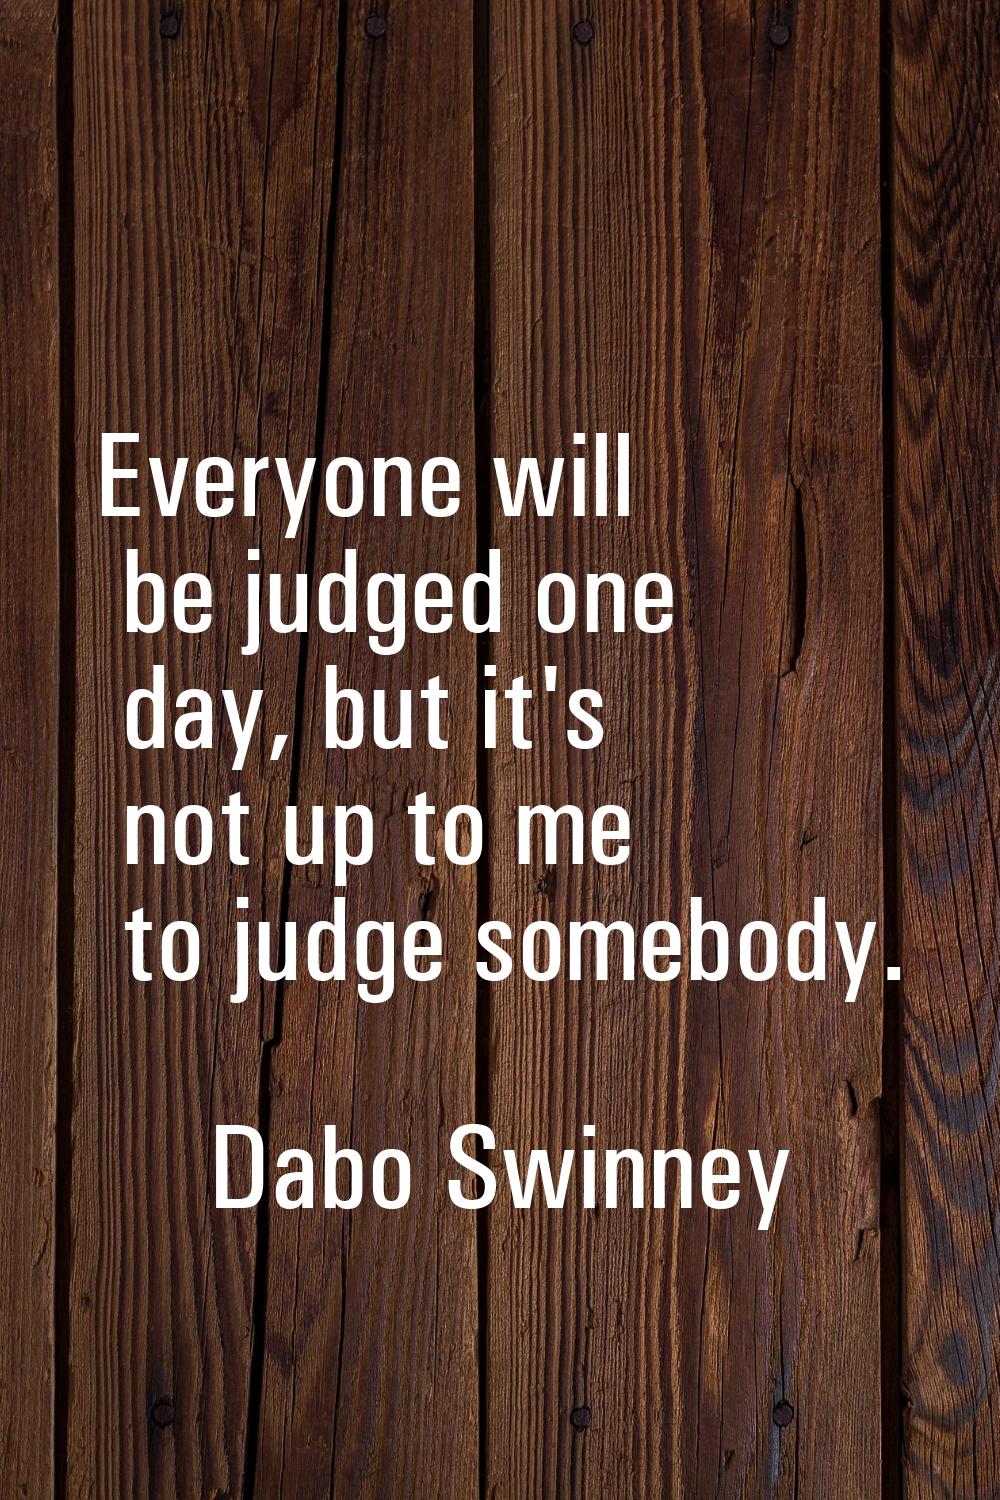 Everyone will be judged one day, but it's not up to me to judge somebody.